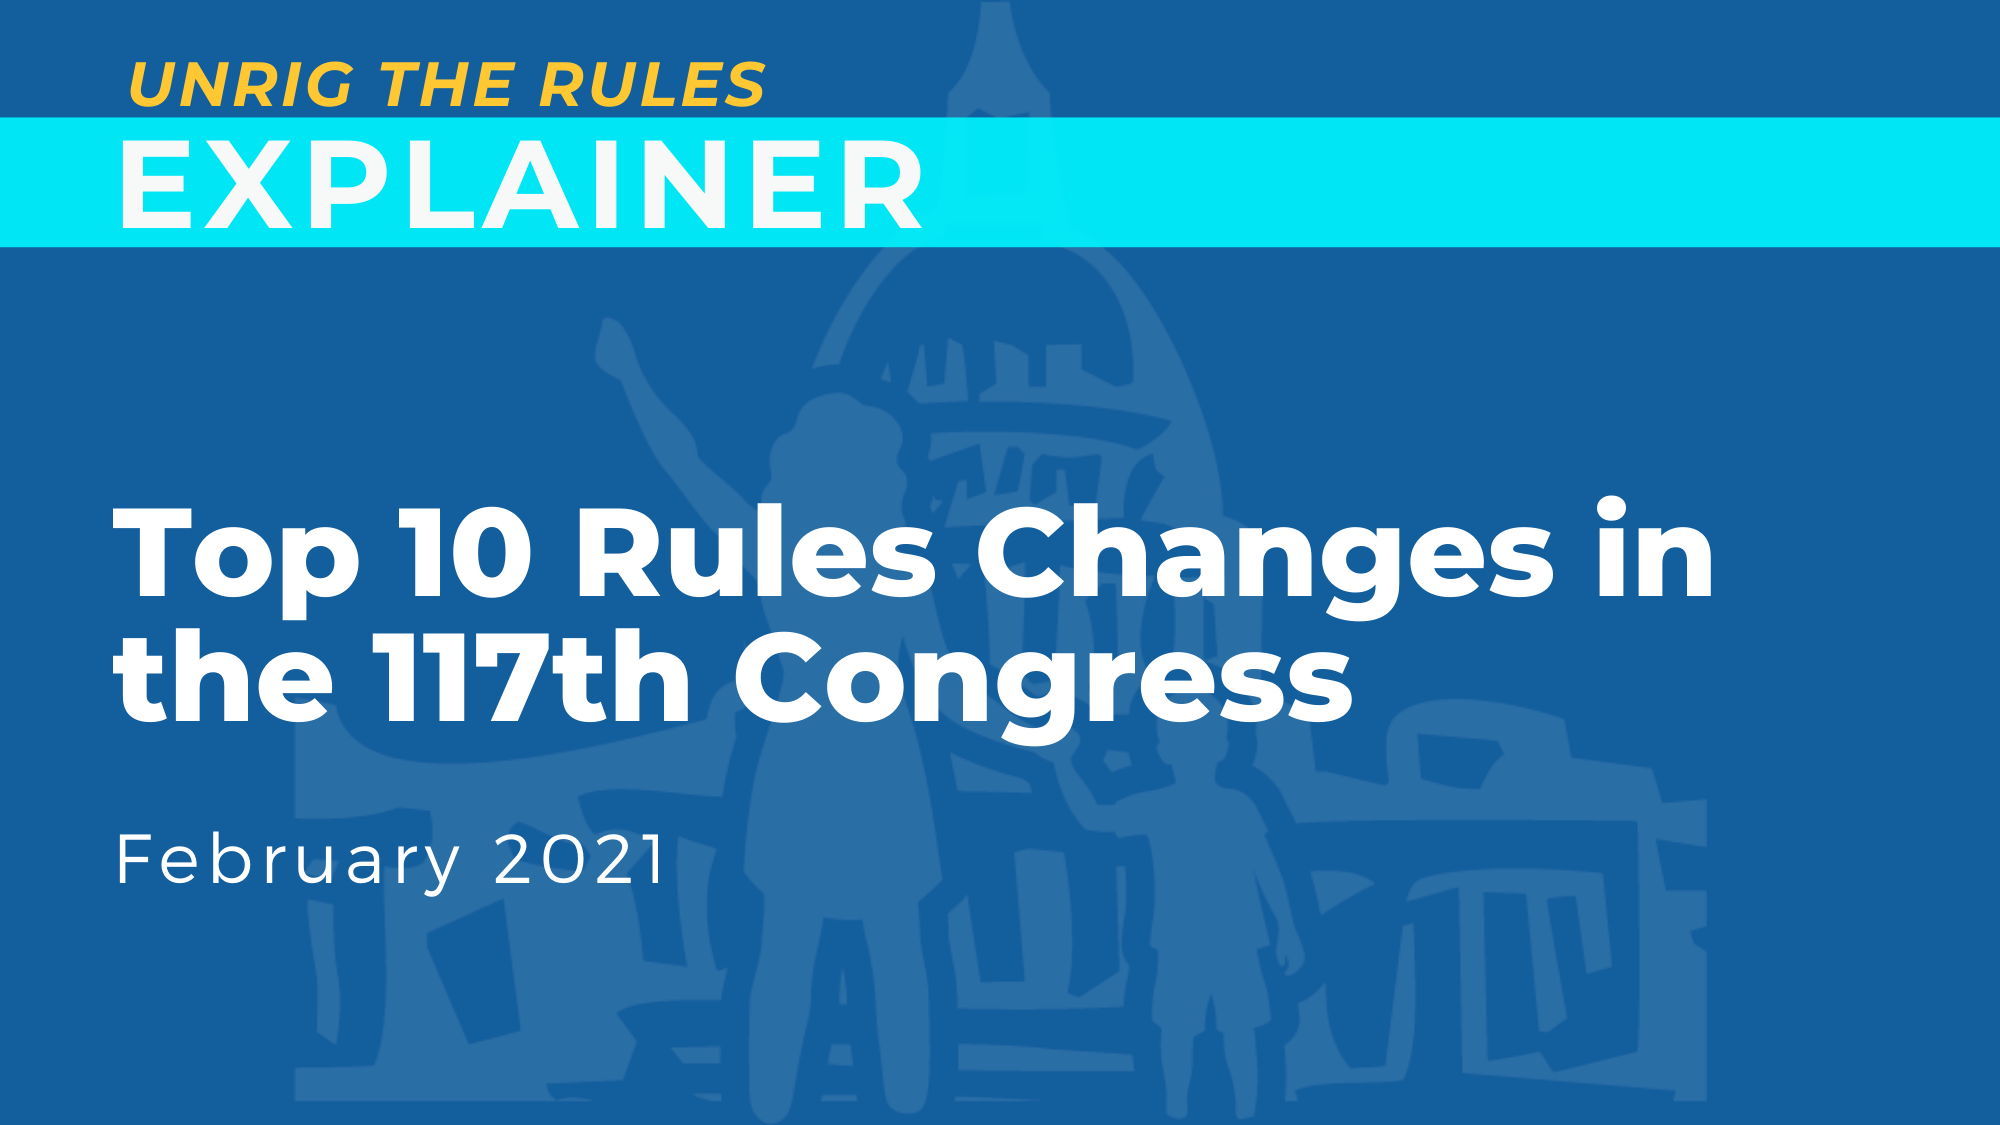 The 10 Rules Changes in the 117th Congress